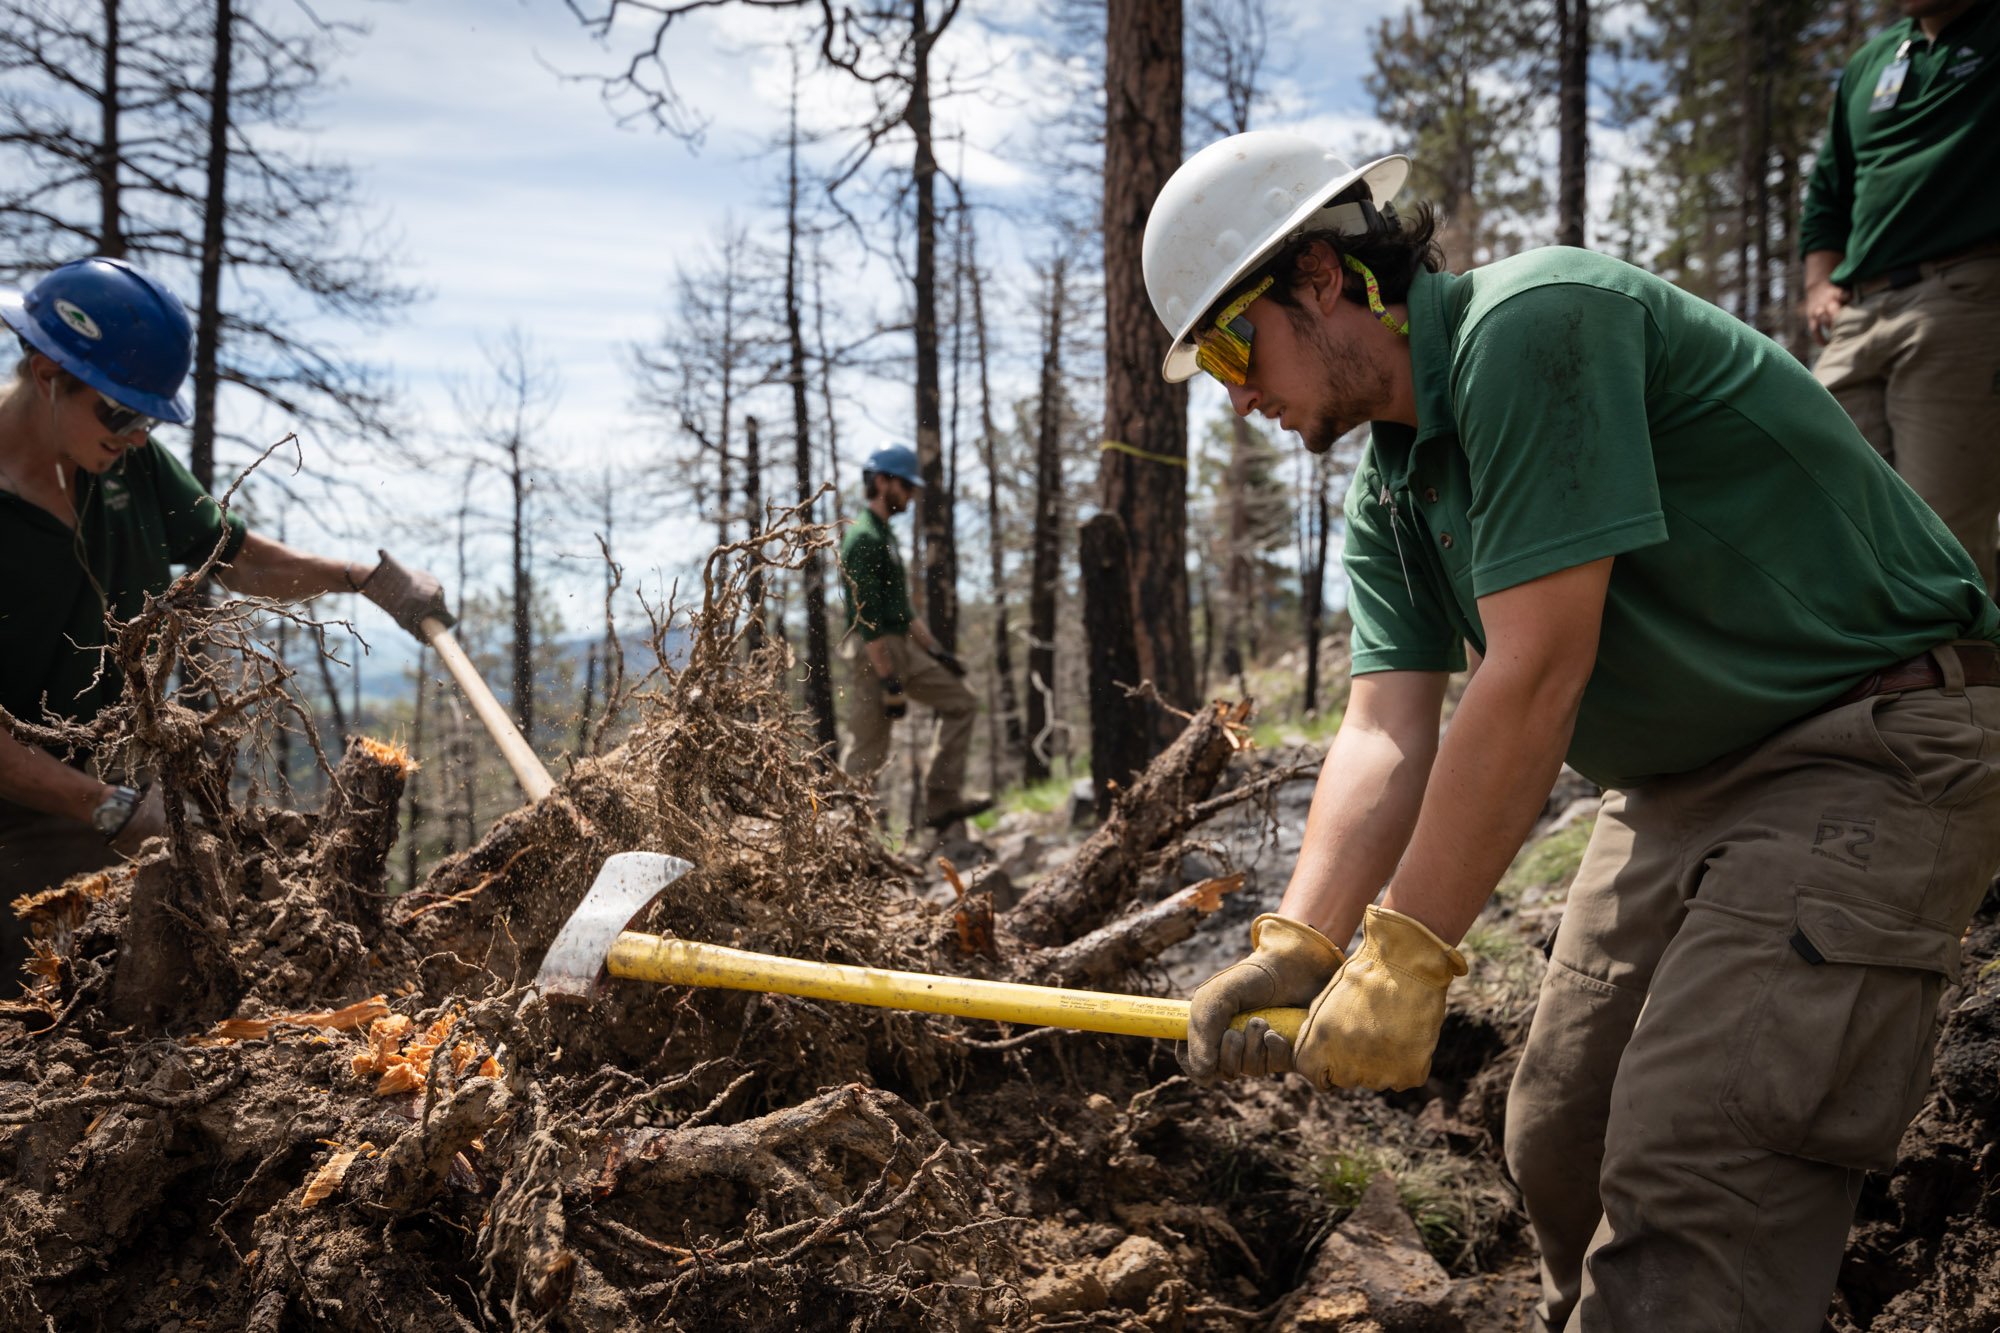  Ben Skidmore knocks dirt off an uprooted stump while building trail at Philmont Scout Ranch in Cimarron, N.M. on June 2, 2021.  